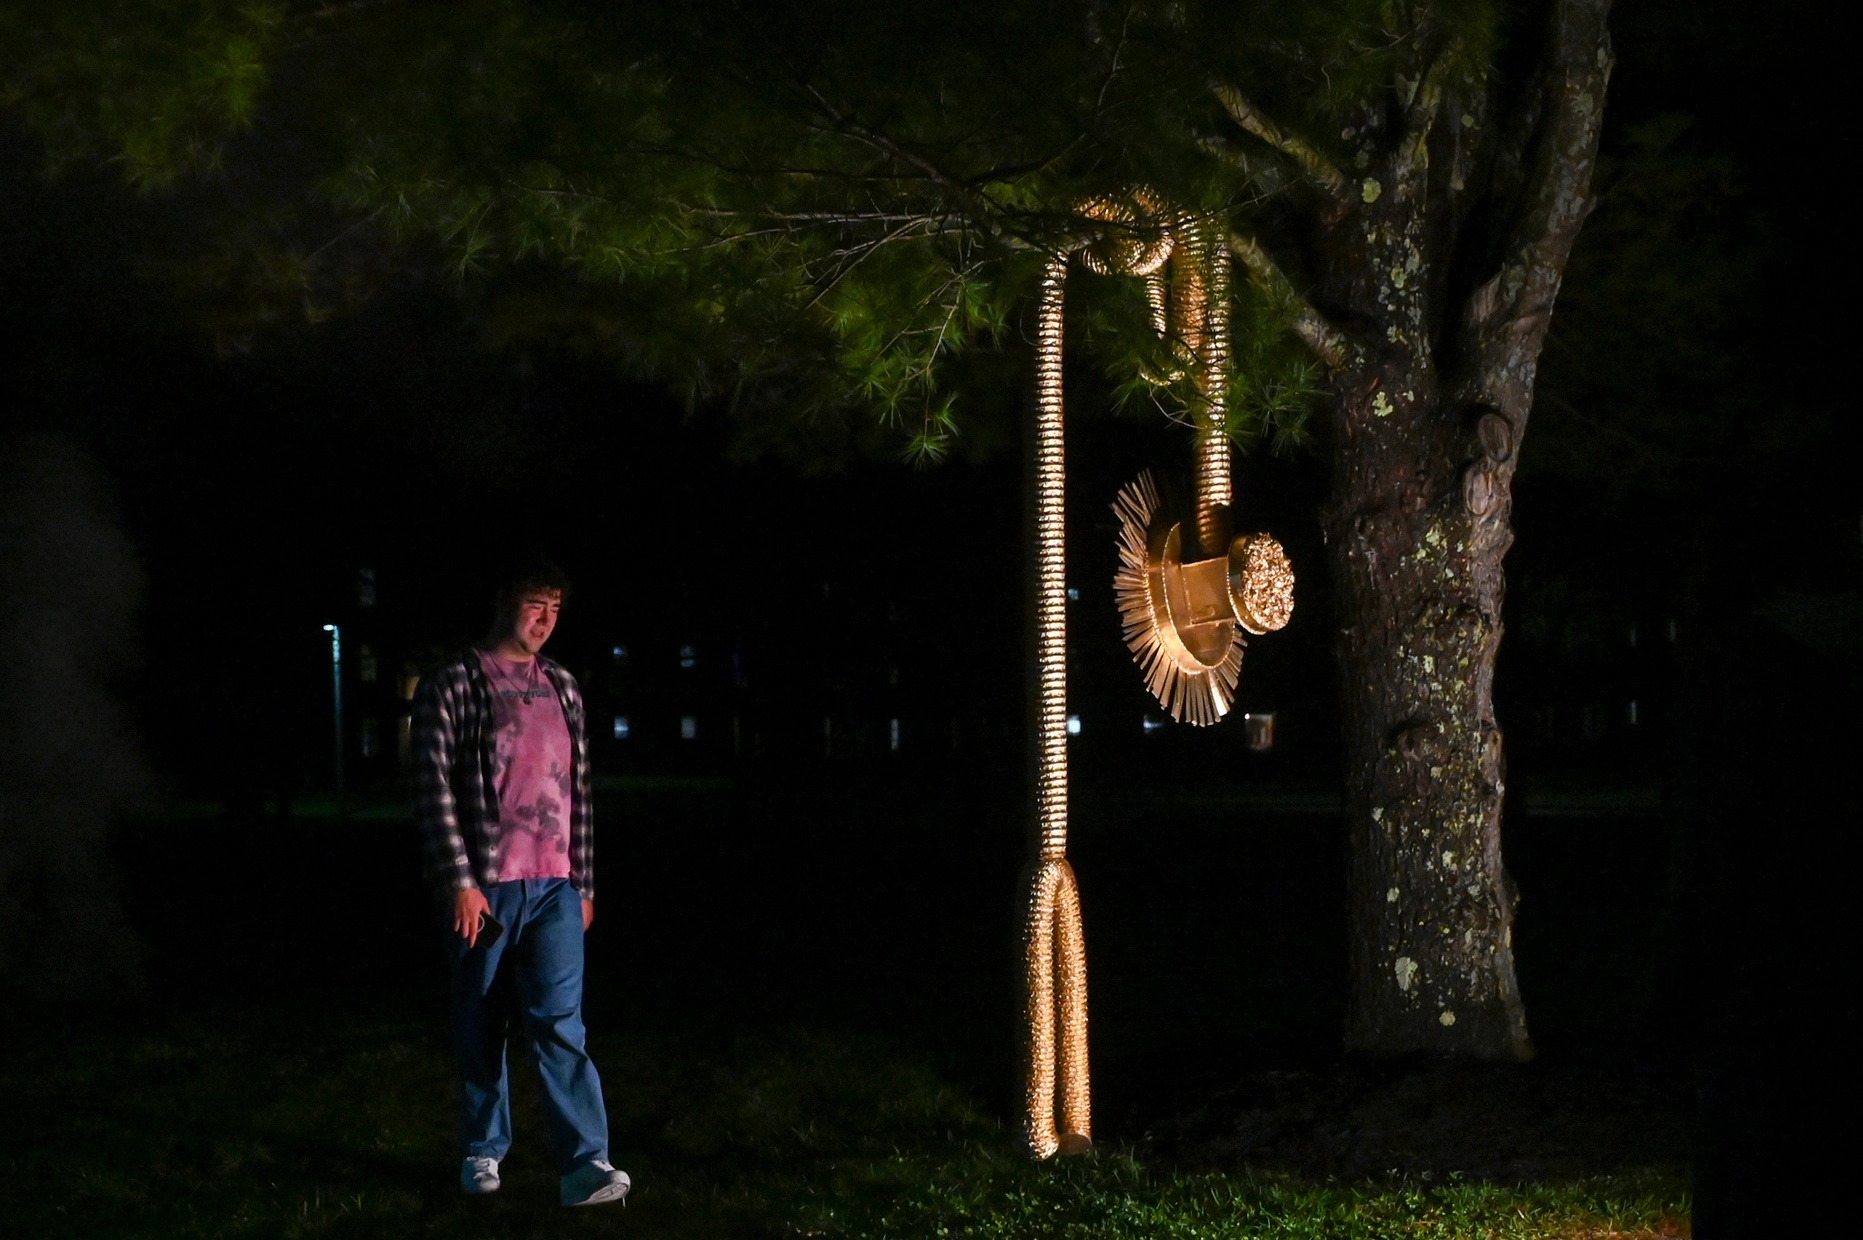 A person walks from the dark towards a lit sculpture of a stethoscope hanging from a tree.